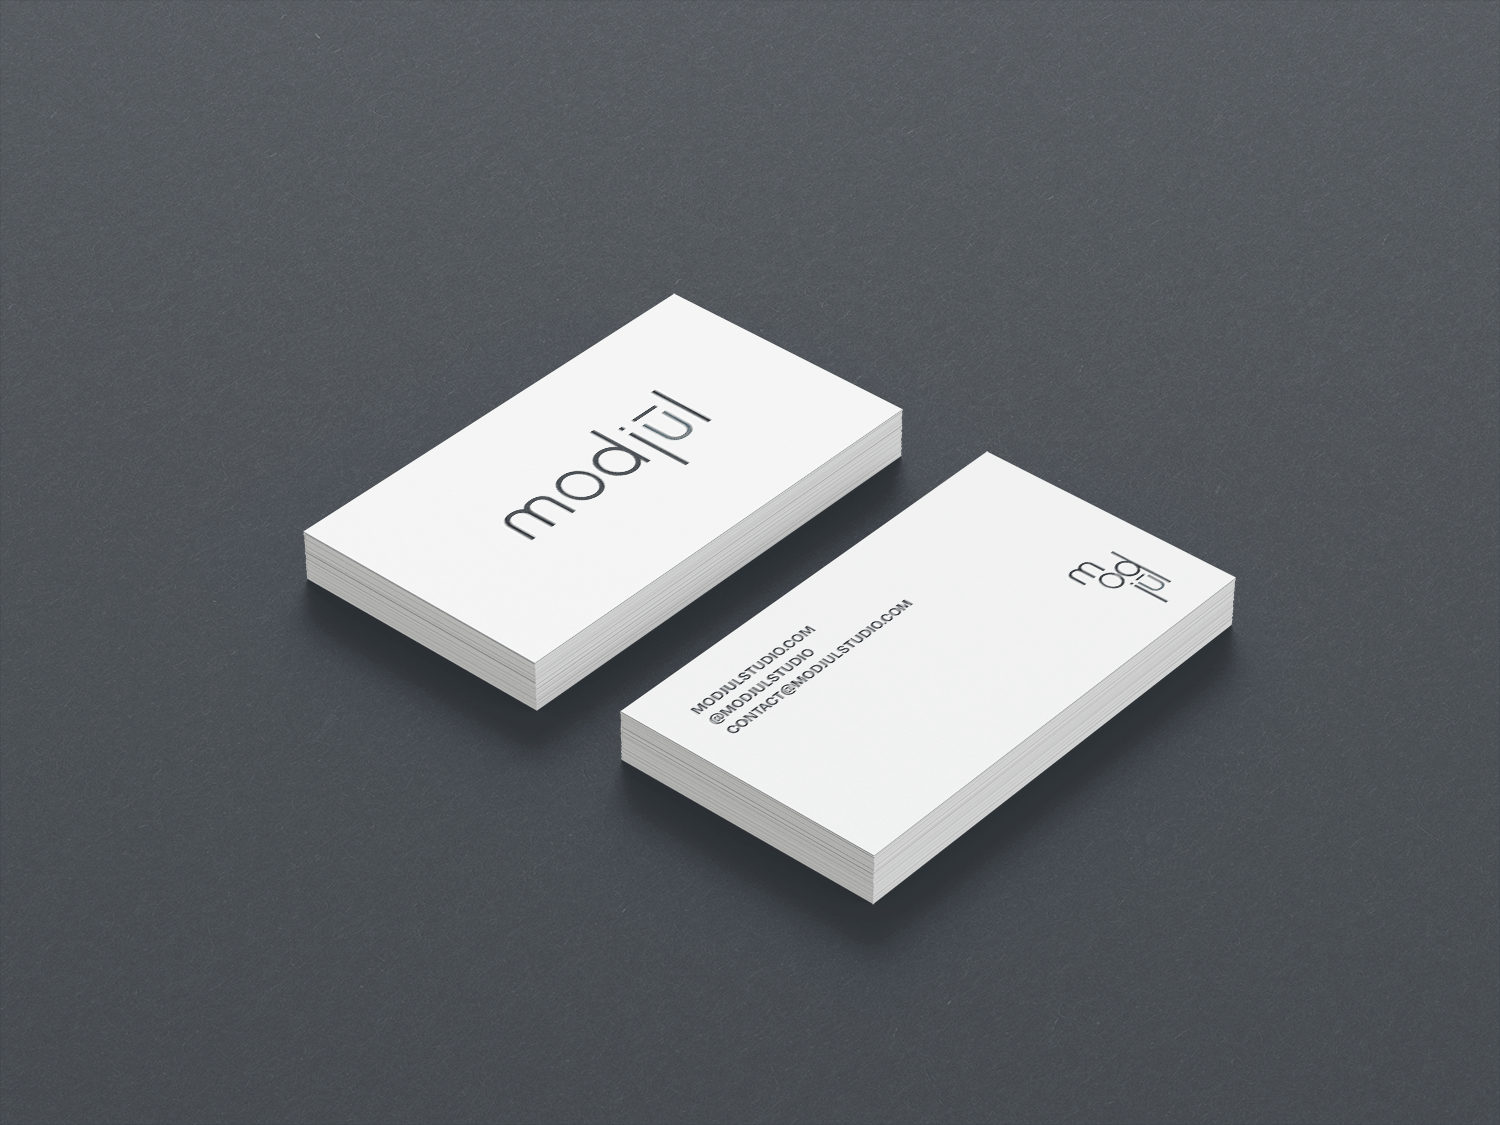 A mockup of the modjūl business cards designed by Aprille.